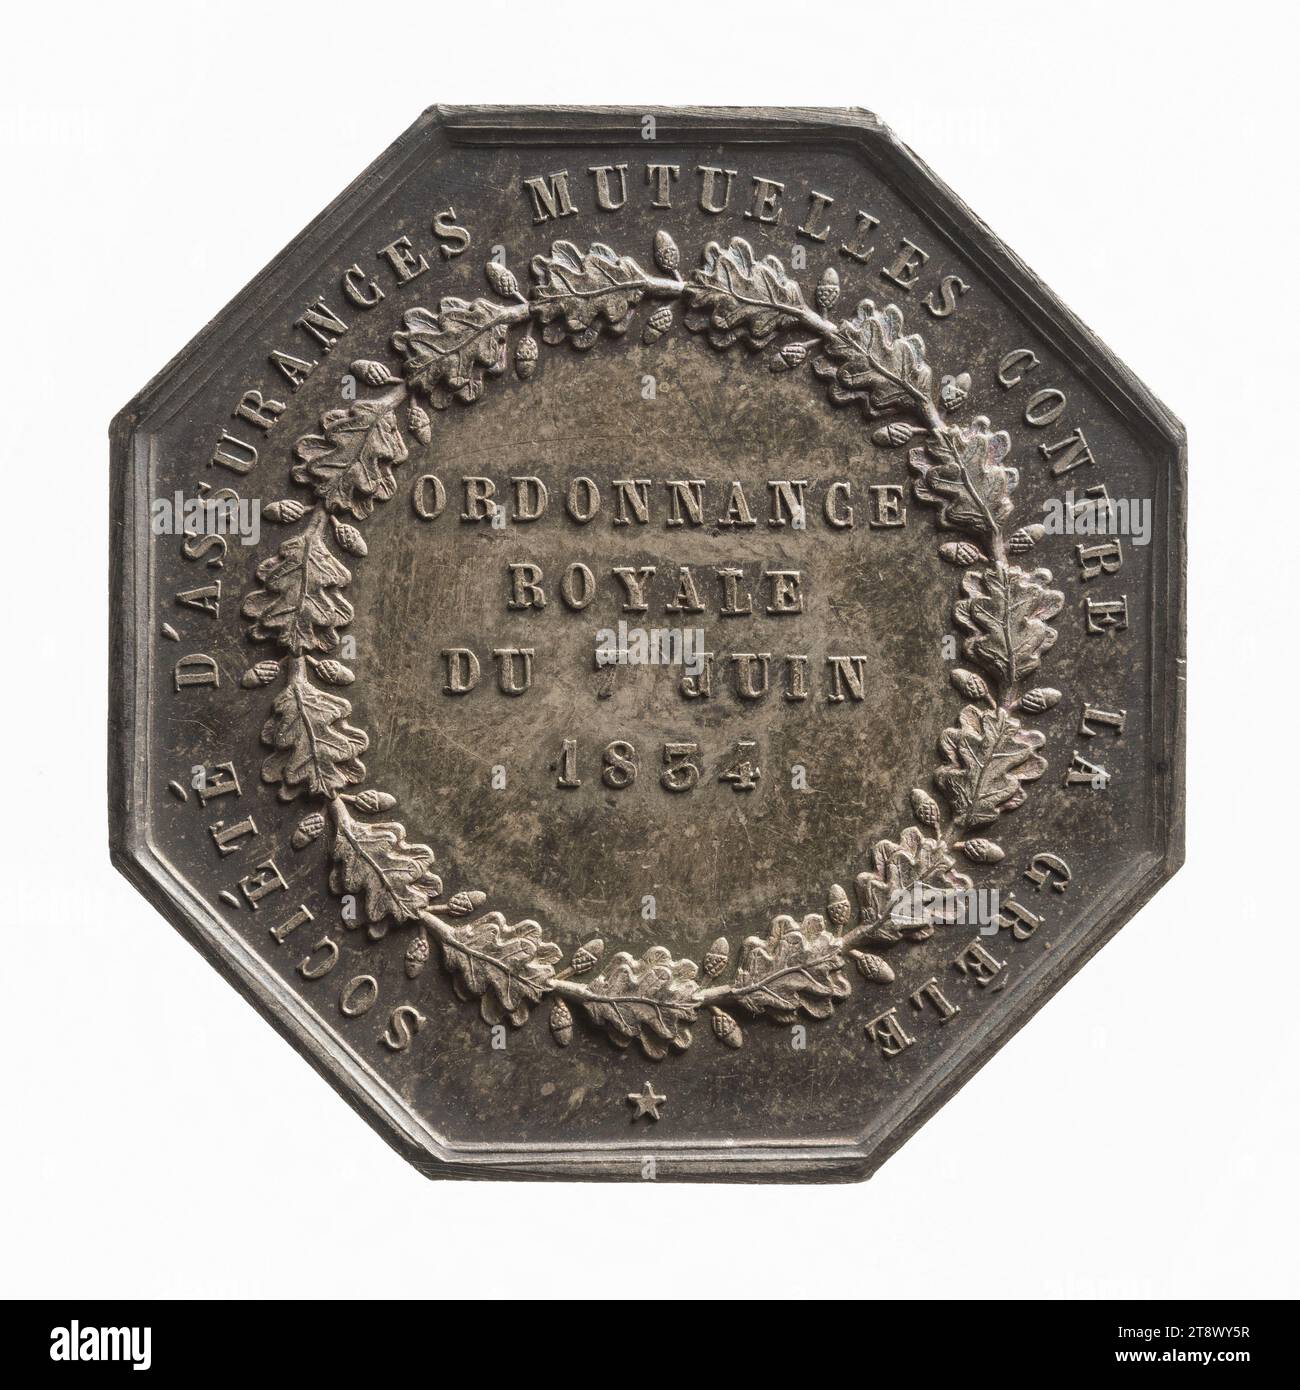 L'Etoile: mutual insurance company against hail, after 1834, Caqué, Armand-Auguste, Engraver in medals, After 1834, Numismatics, Token (numismatics), Silver, Dimensions - Work: Diameter: 3.6 cm, Weight (type dimension): 21.97 g Stock Photo